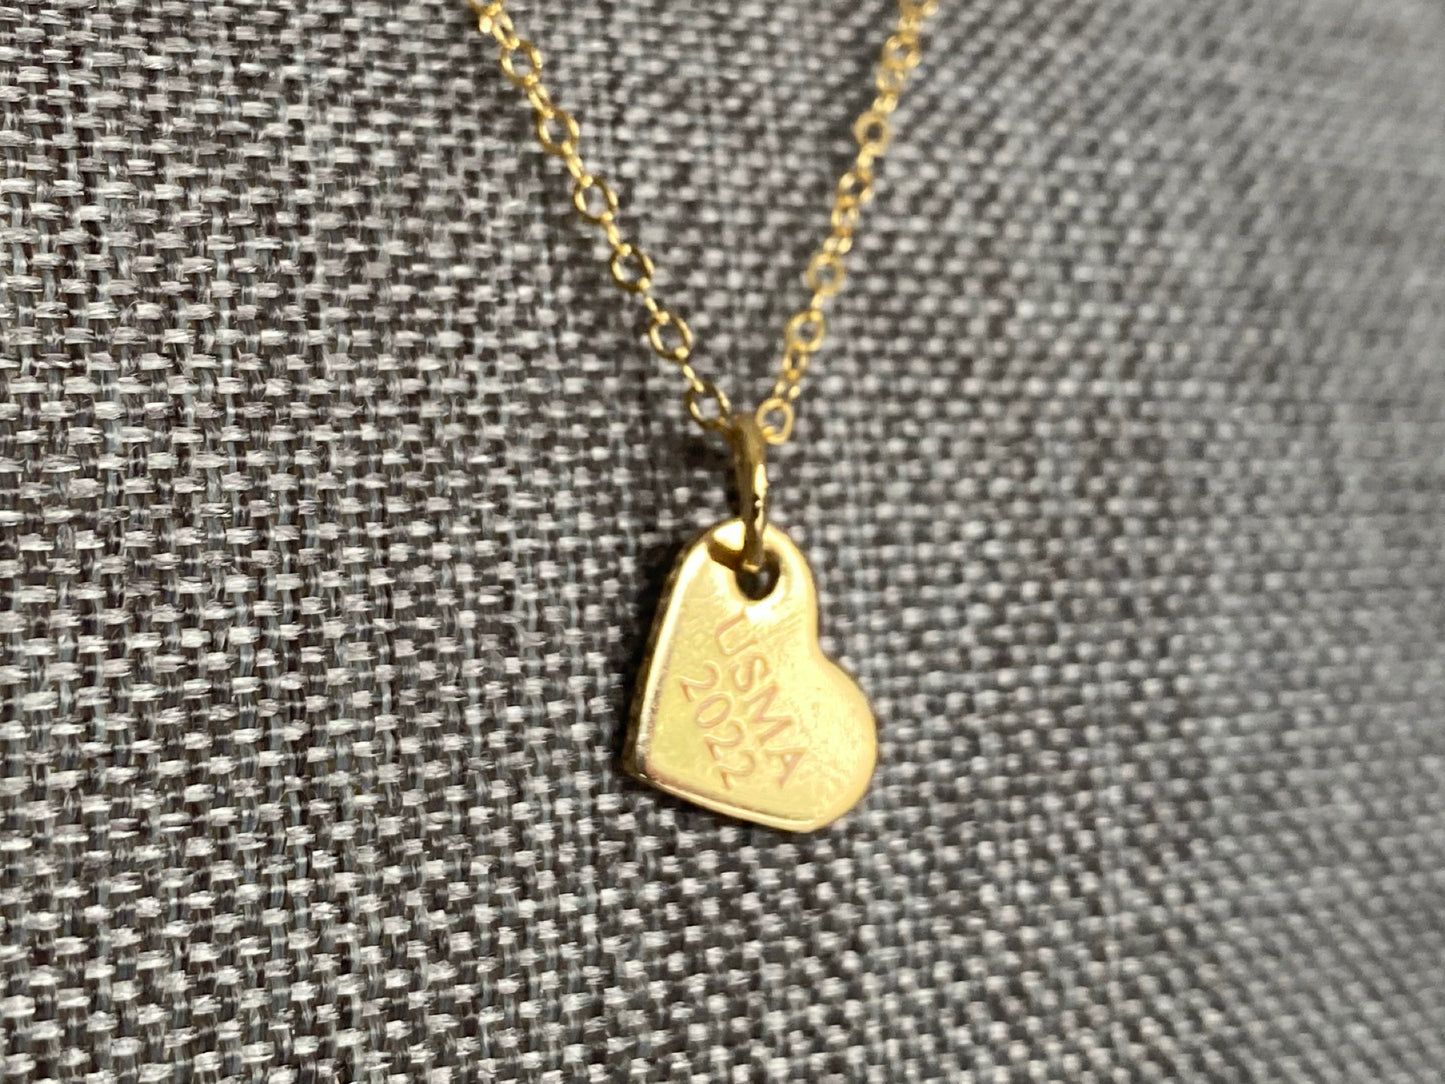 USMA Class of 2022 Gold Heart Charm Necklace BR526